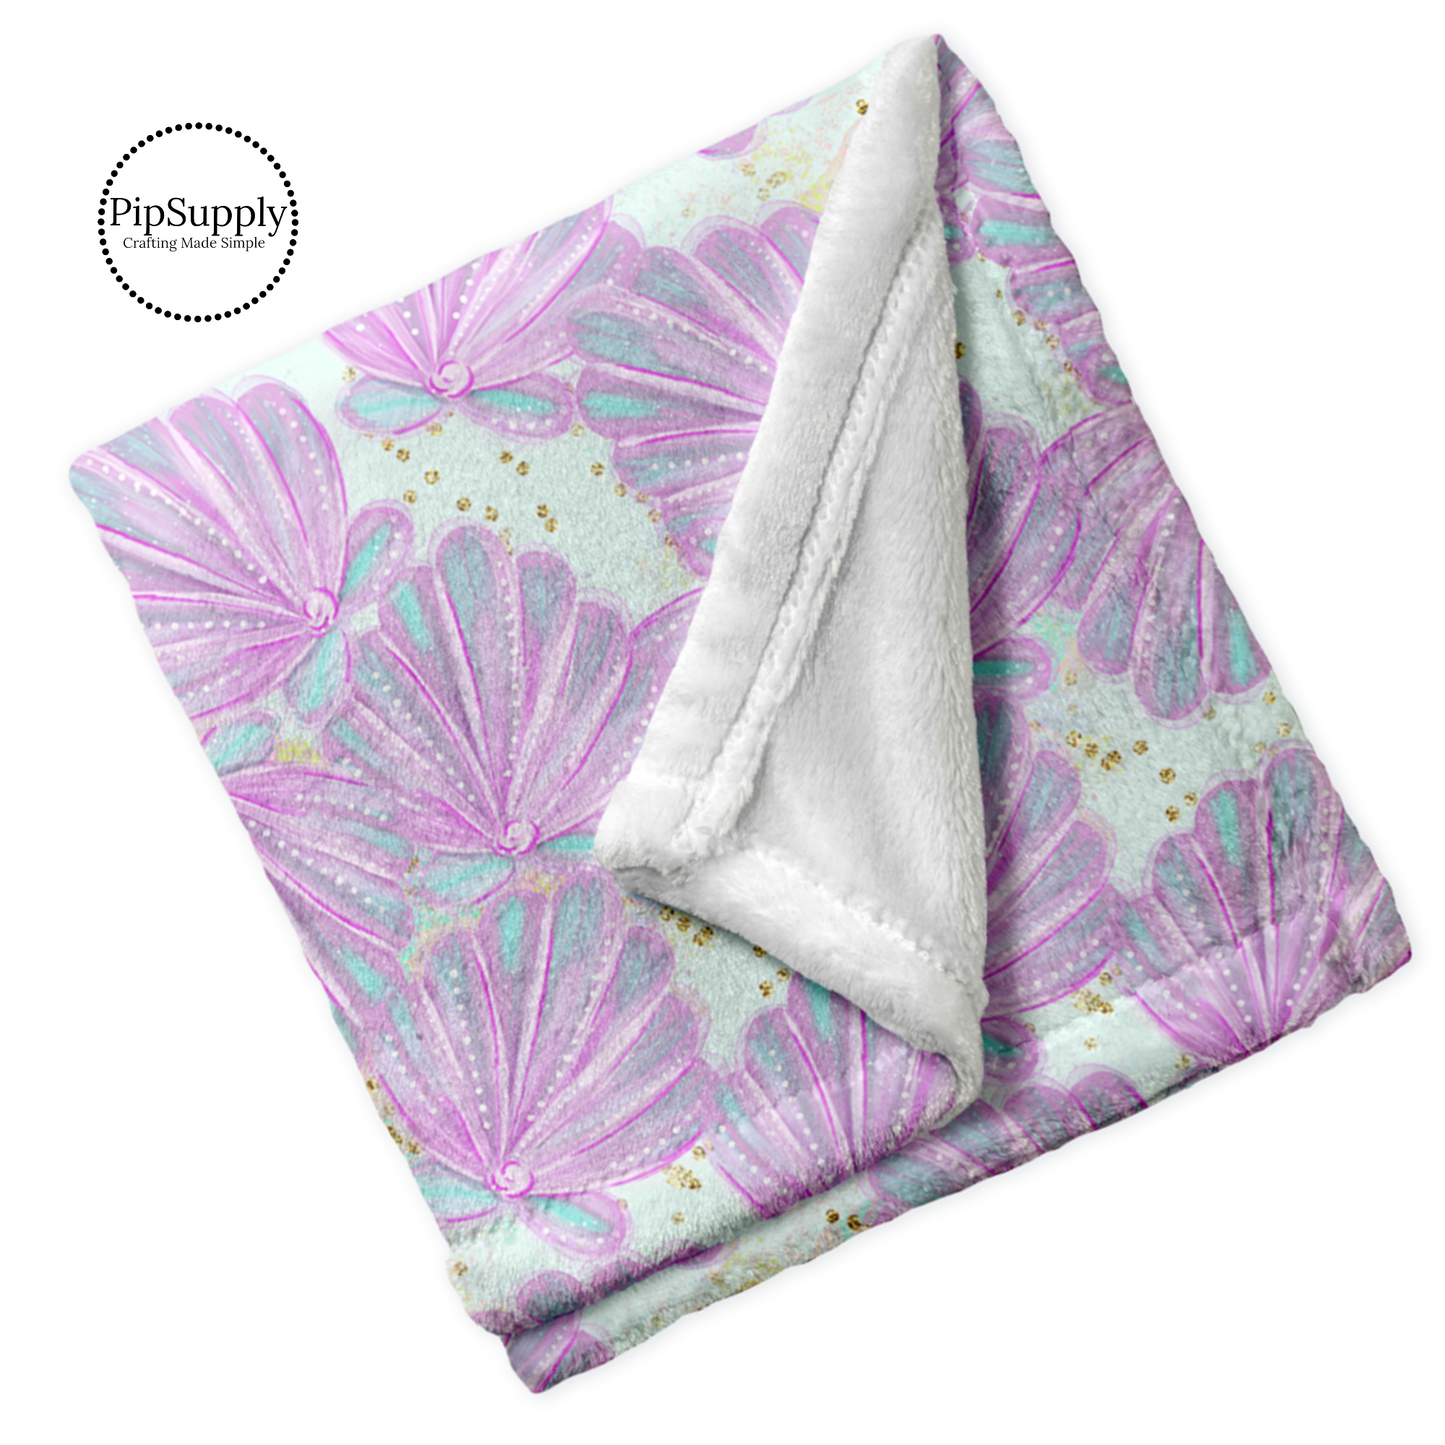 Soft white folded blanket with watercolor lavender, pink, and aqua seashells with gold flecks pattern.